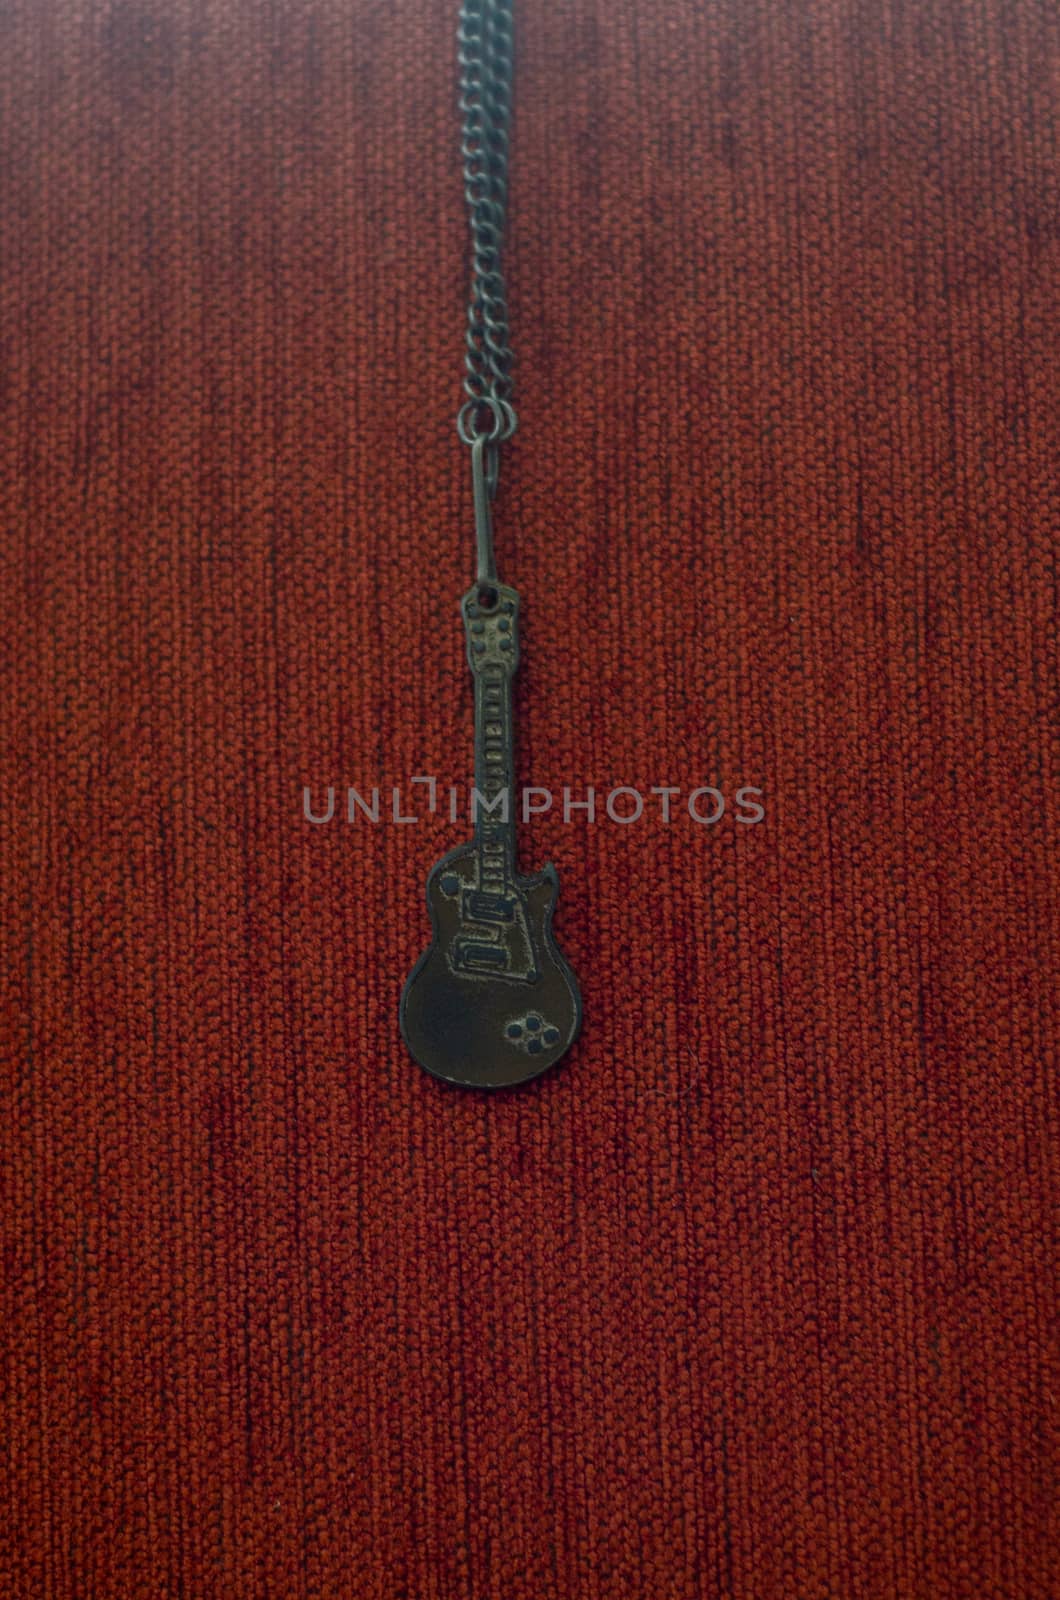 Old Rusty Guitar Necklace, Vintage Rusty Guitar Necklace, Accessory by Hasilyus